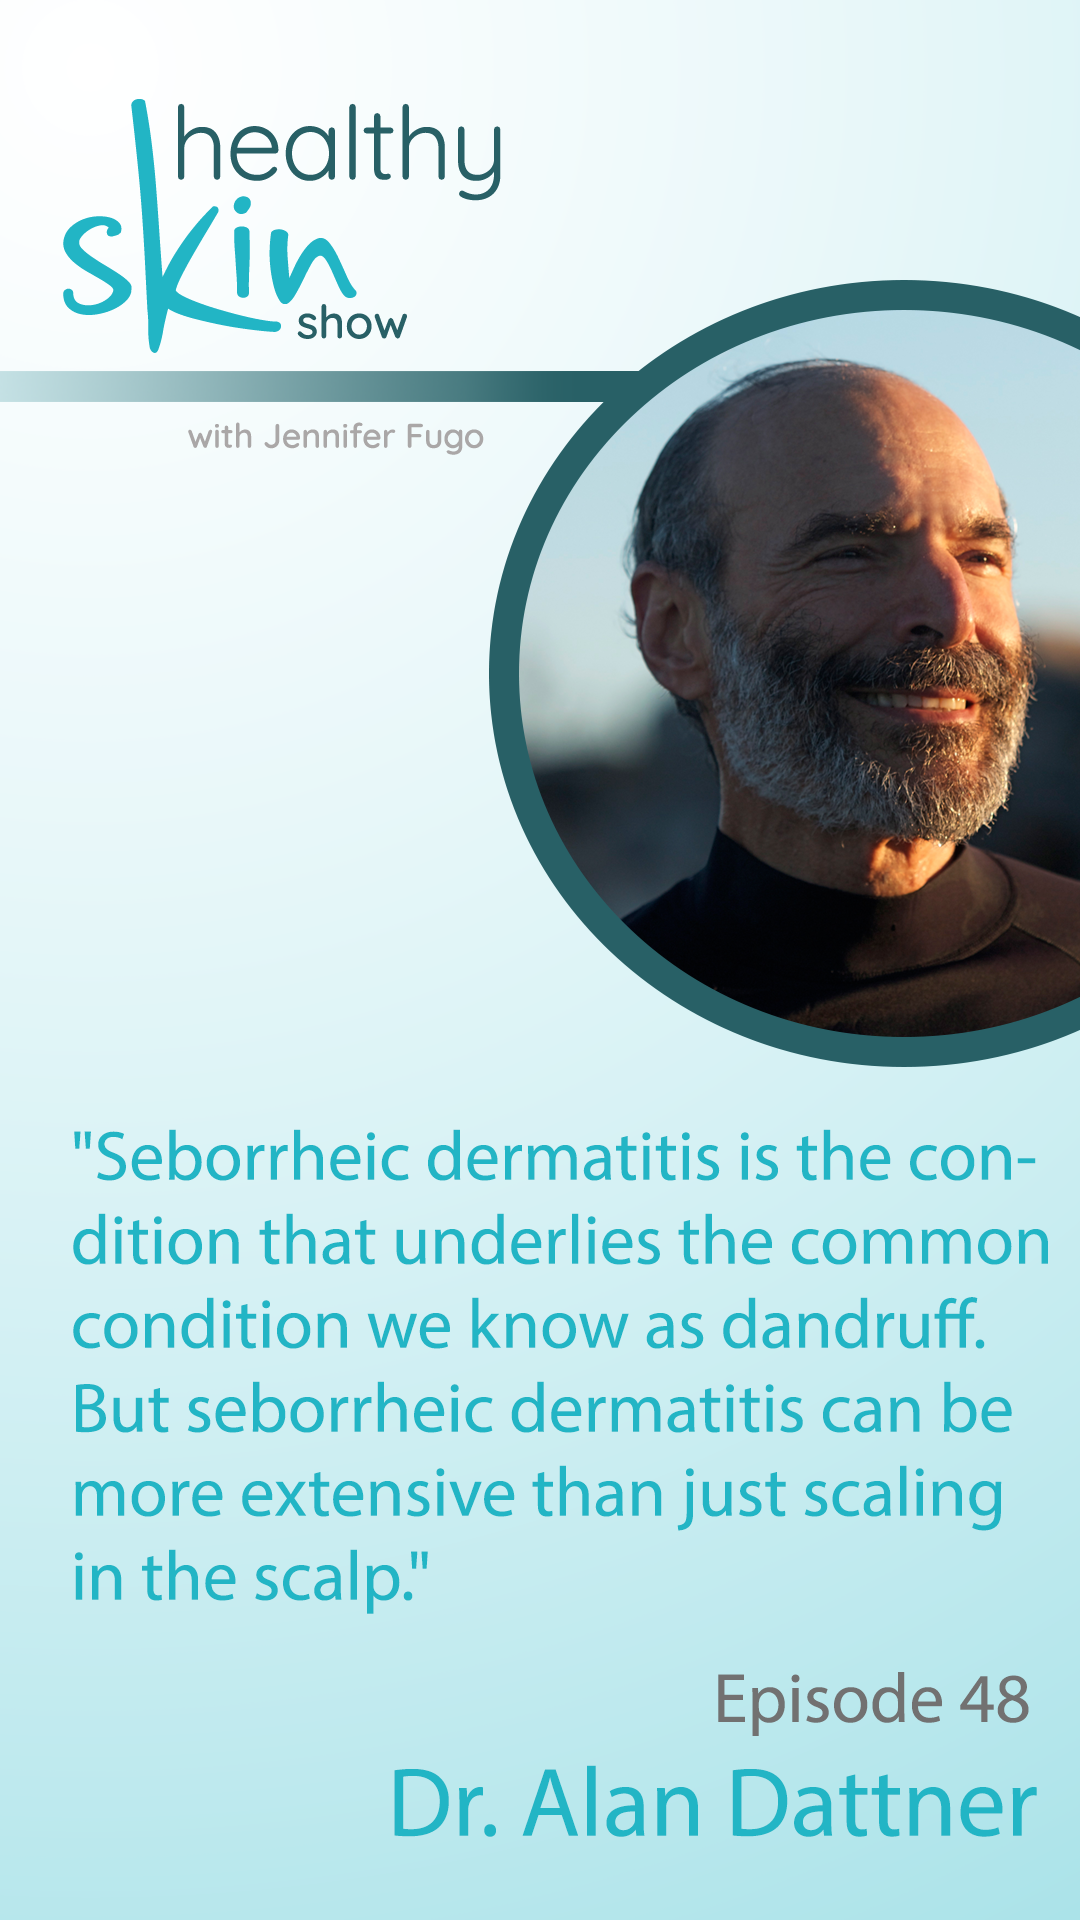 “Seborrheic dermatitis is the condition that underlies the common condition we know as dandruff. But seborrheic dermatitis can be more extensive than just scaling in the scalp.”